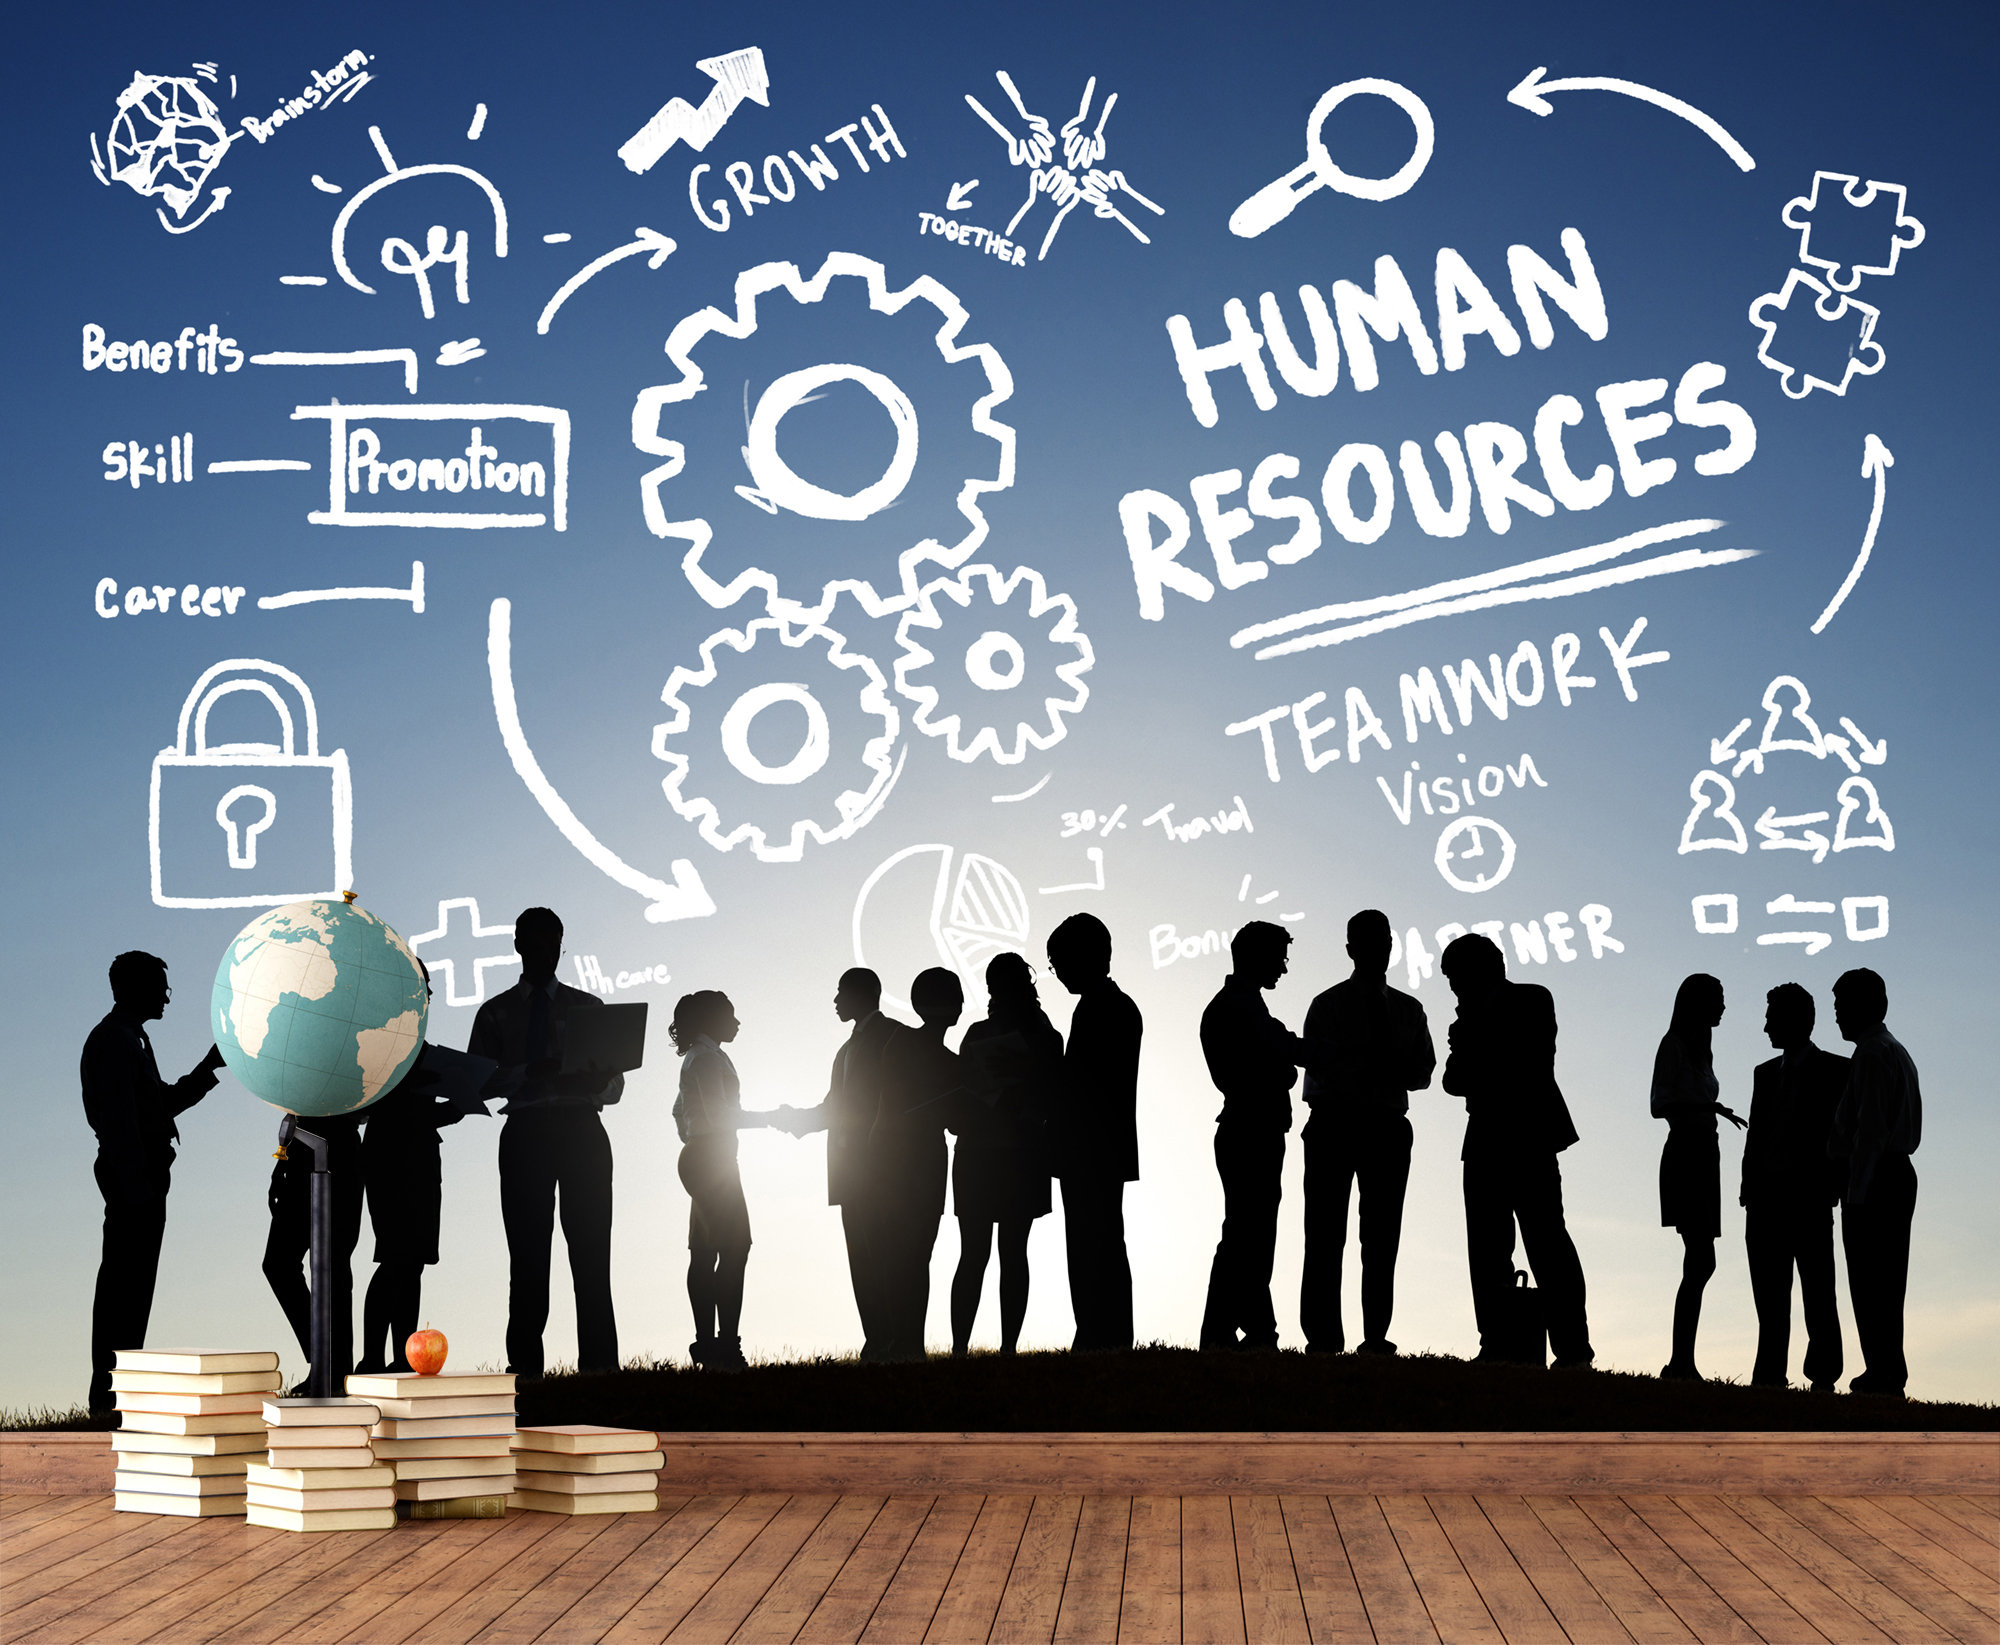 243900 Human Resources Stock Photos Pictures  RoyaltyFree Images   iStock  Human resources icons Human resources management Human resources  icon